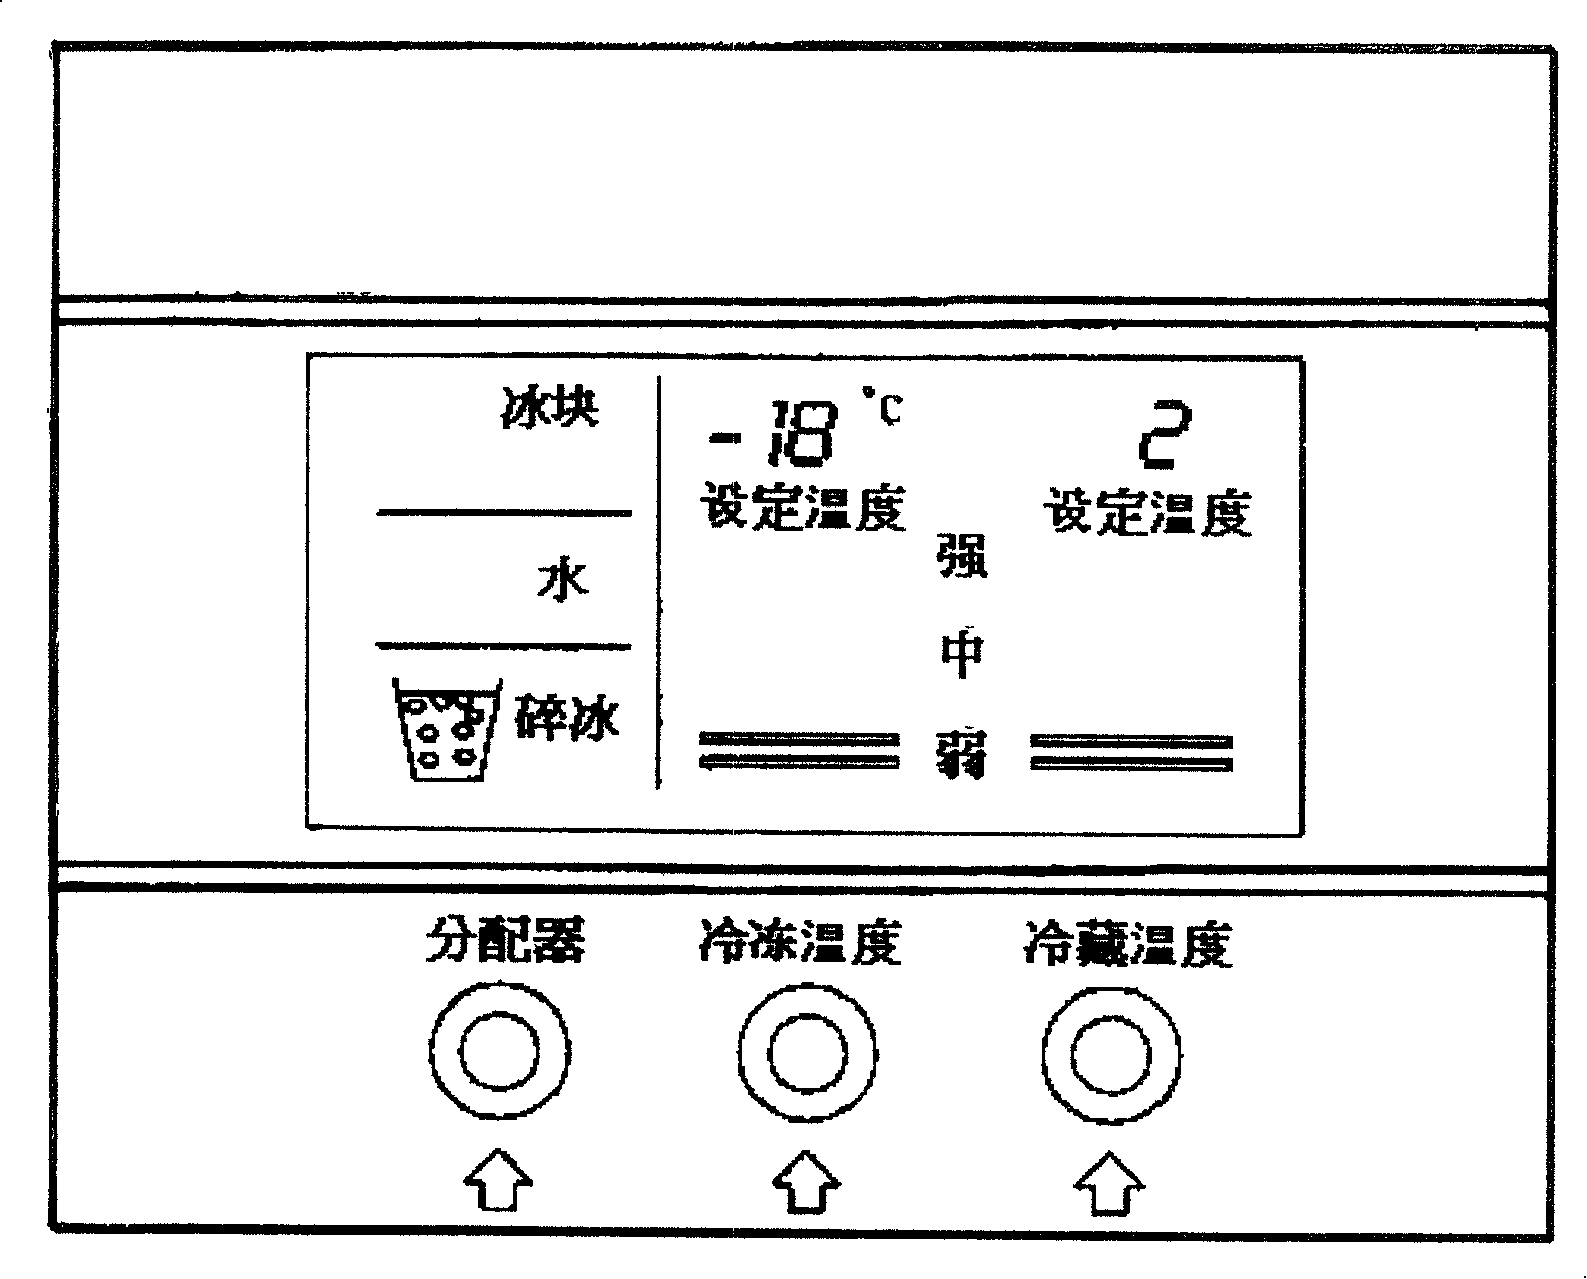 Refrigerator with fault information leading function